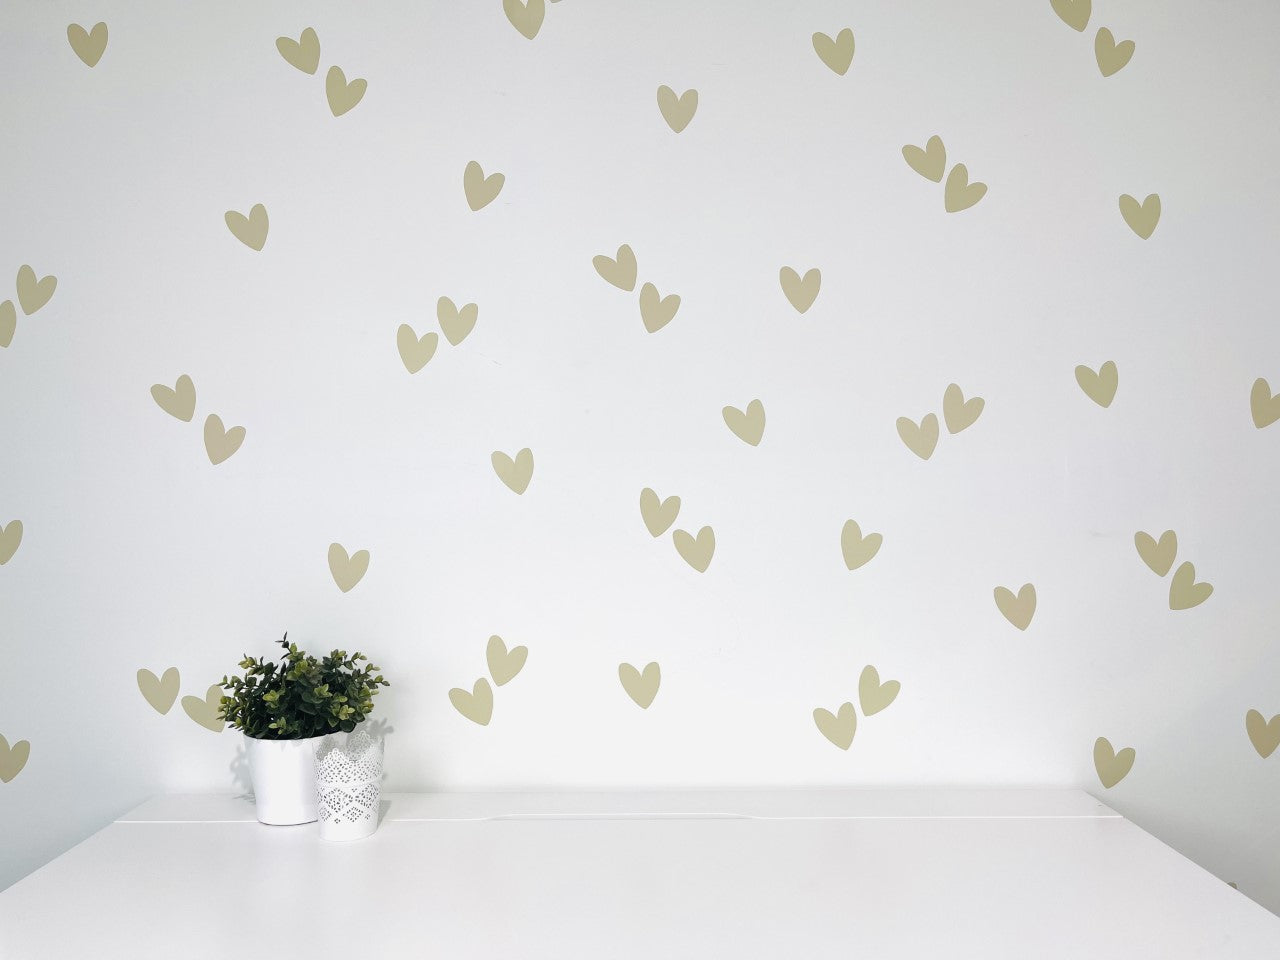 SALE - Hearts Wall Decals * Please read listing